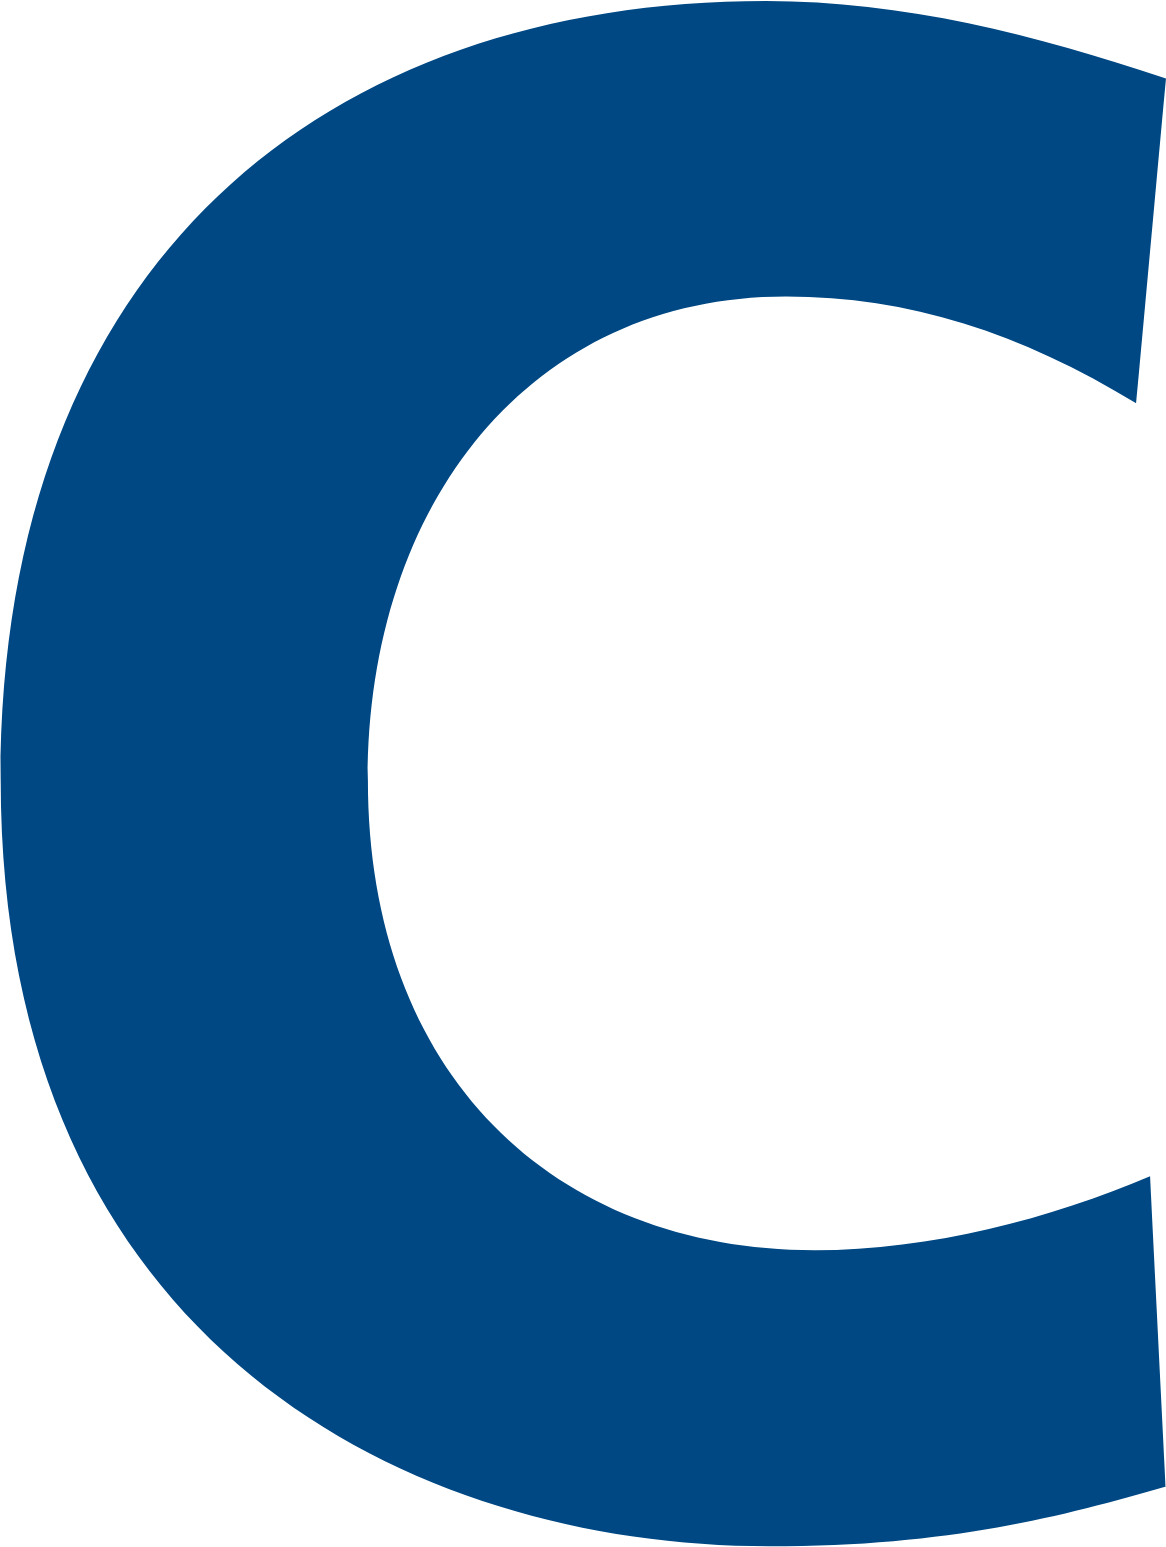 Crompton Greaves Consumer Electricals logo (transparent PNG)